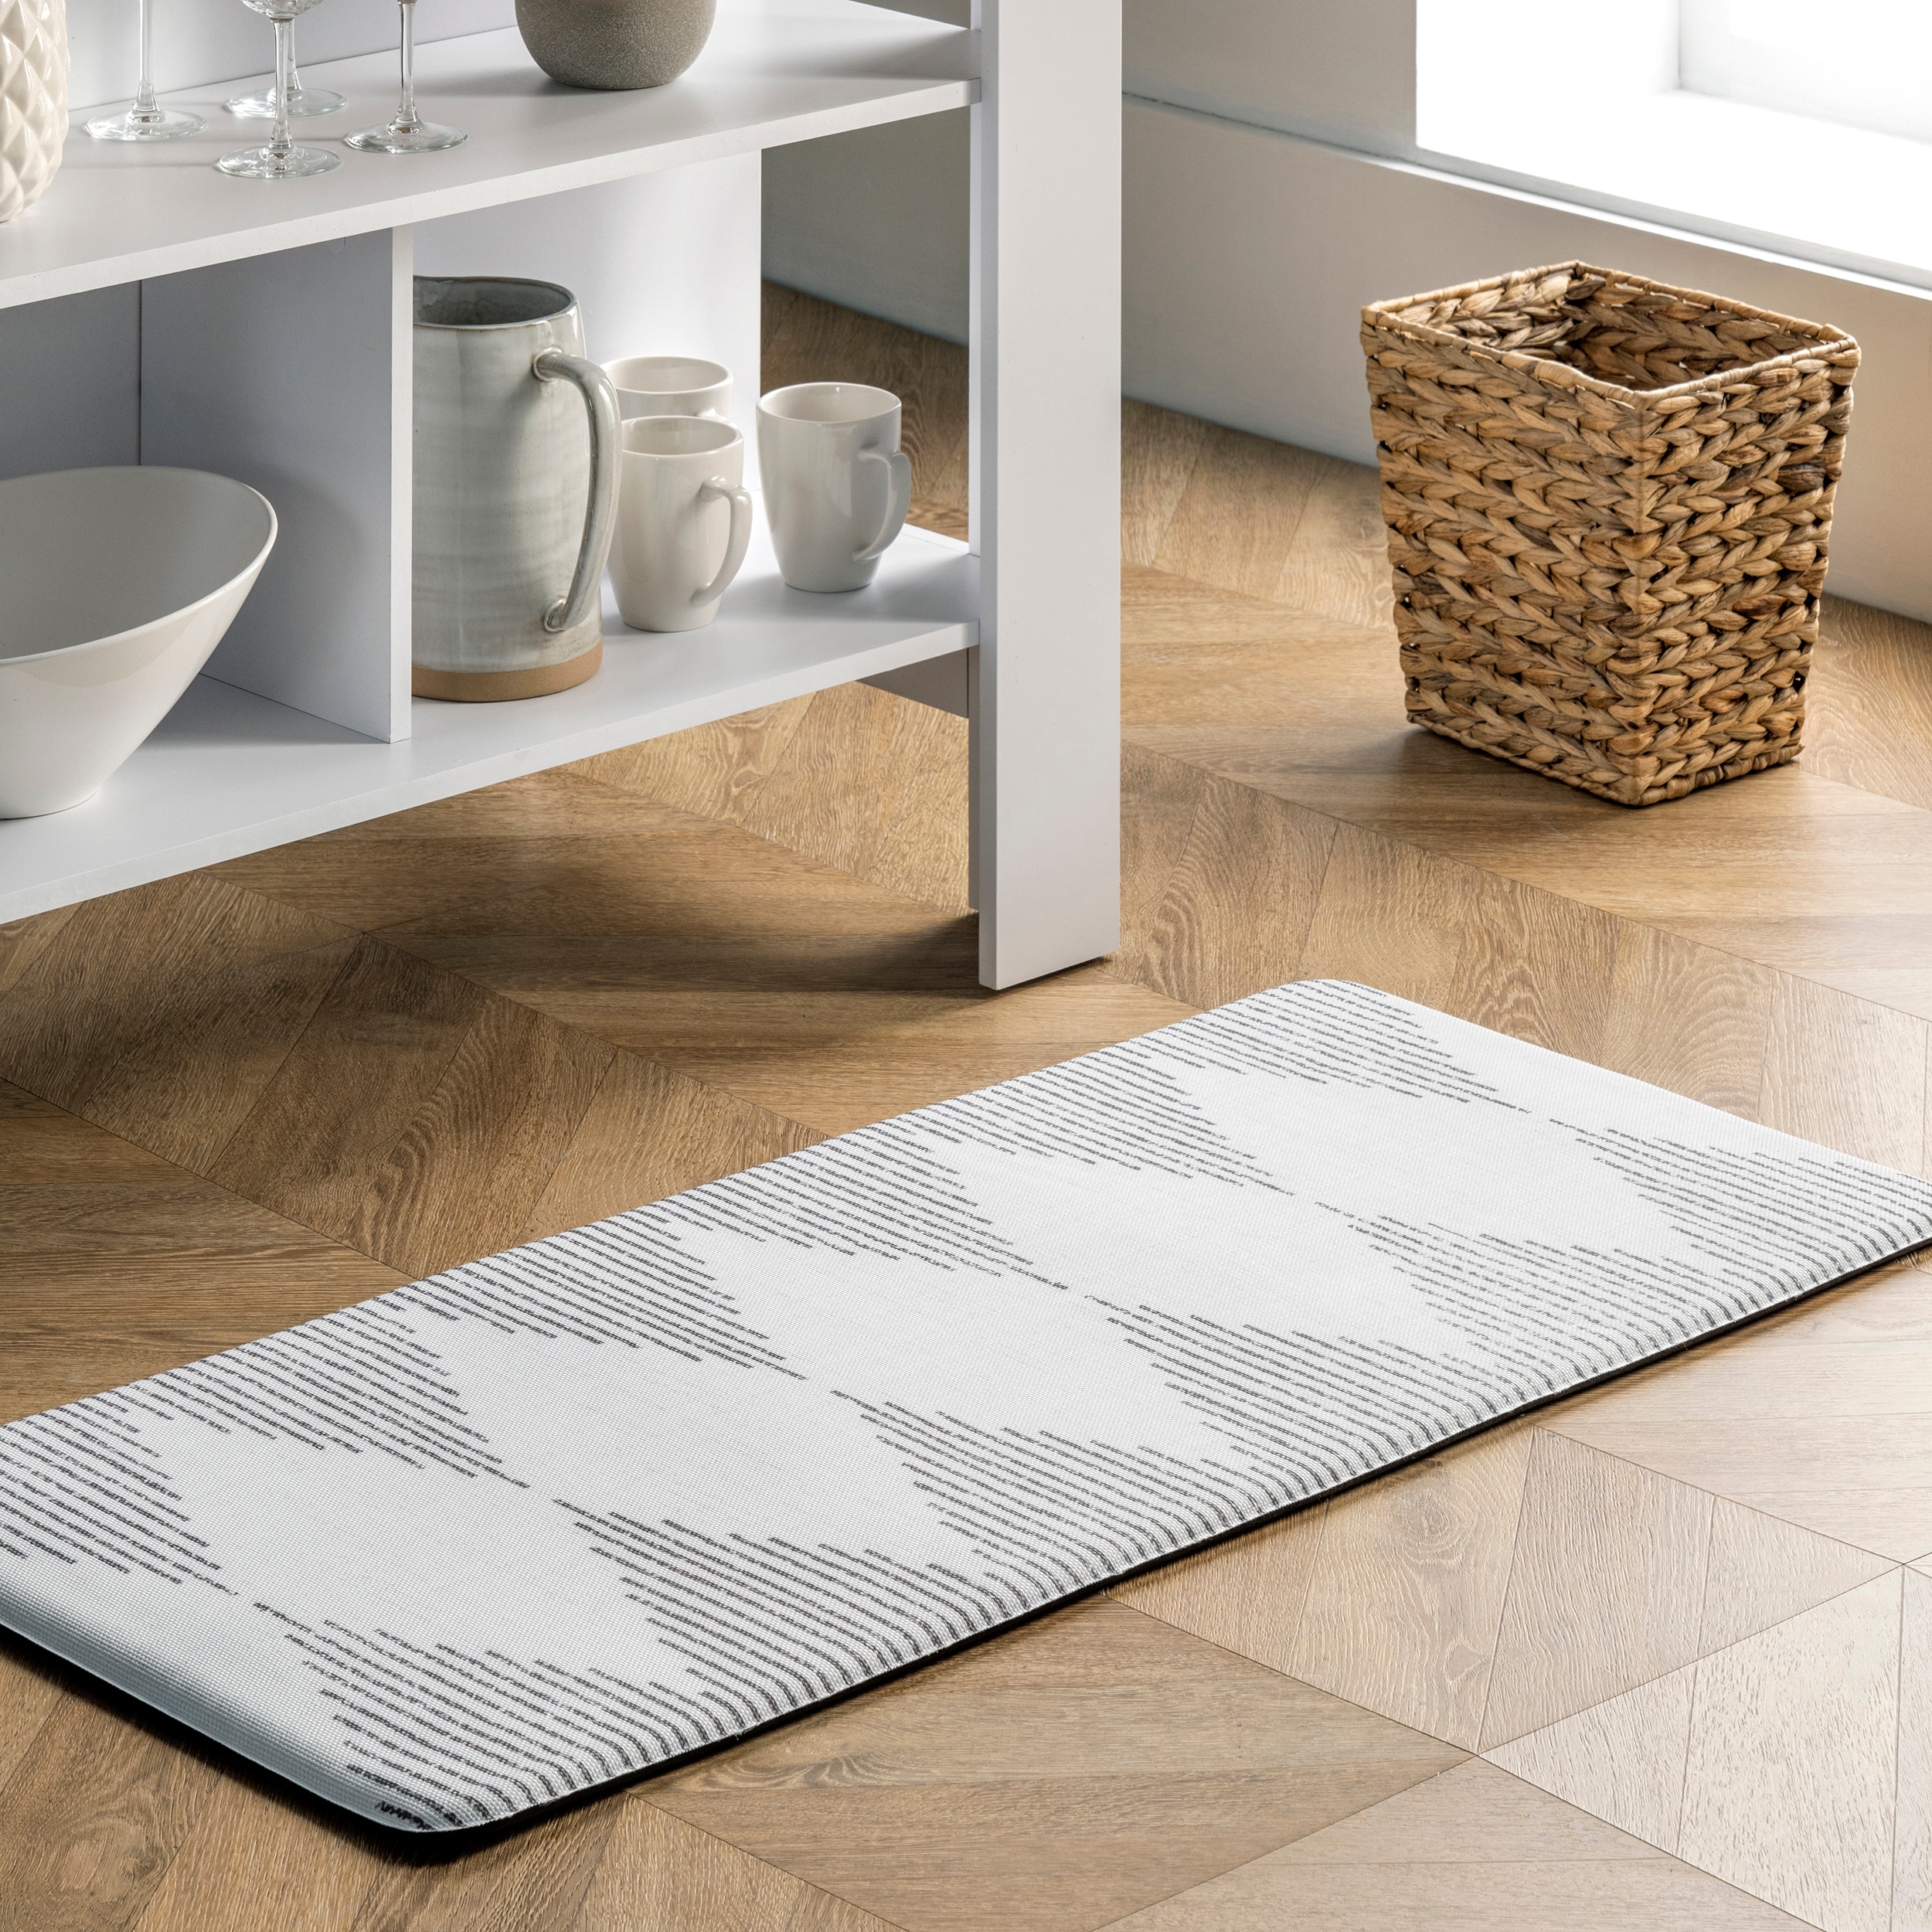 https://ak1.ostkcdn.com/images/products/is/images/direct/ca5ded4dea8c181d2dc927f79872b9eab0d2efc0/nuLOOM-Diamond-Stripes-Anti-Fatigue-Kitchen-or-Laundry-Room-Comfort-Mat.jpg